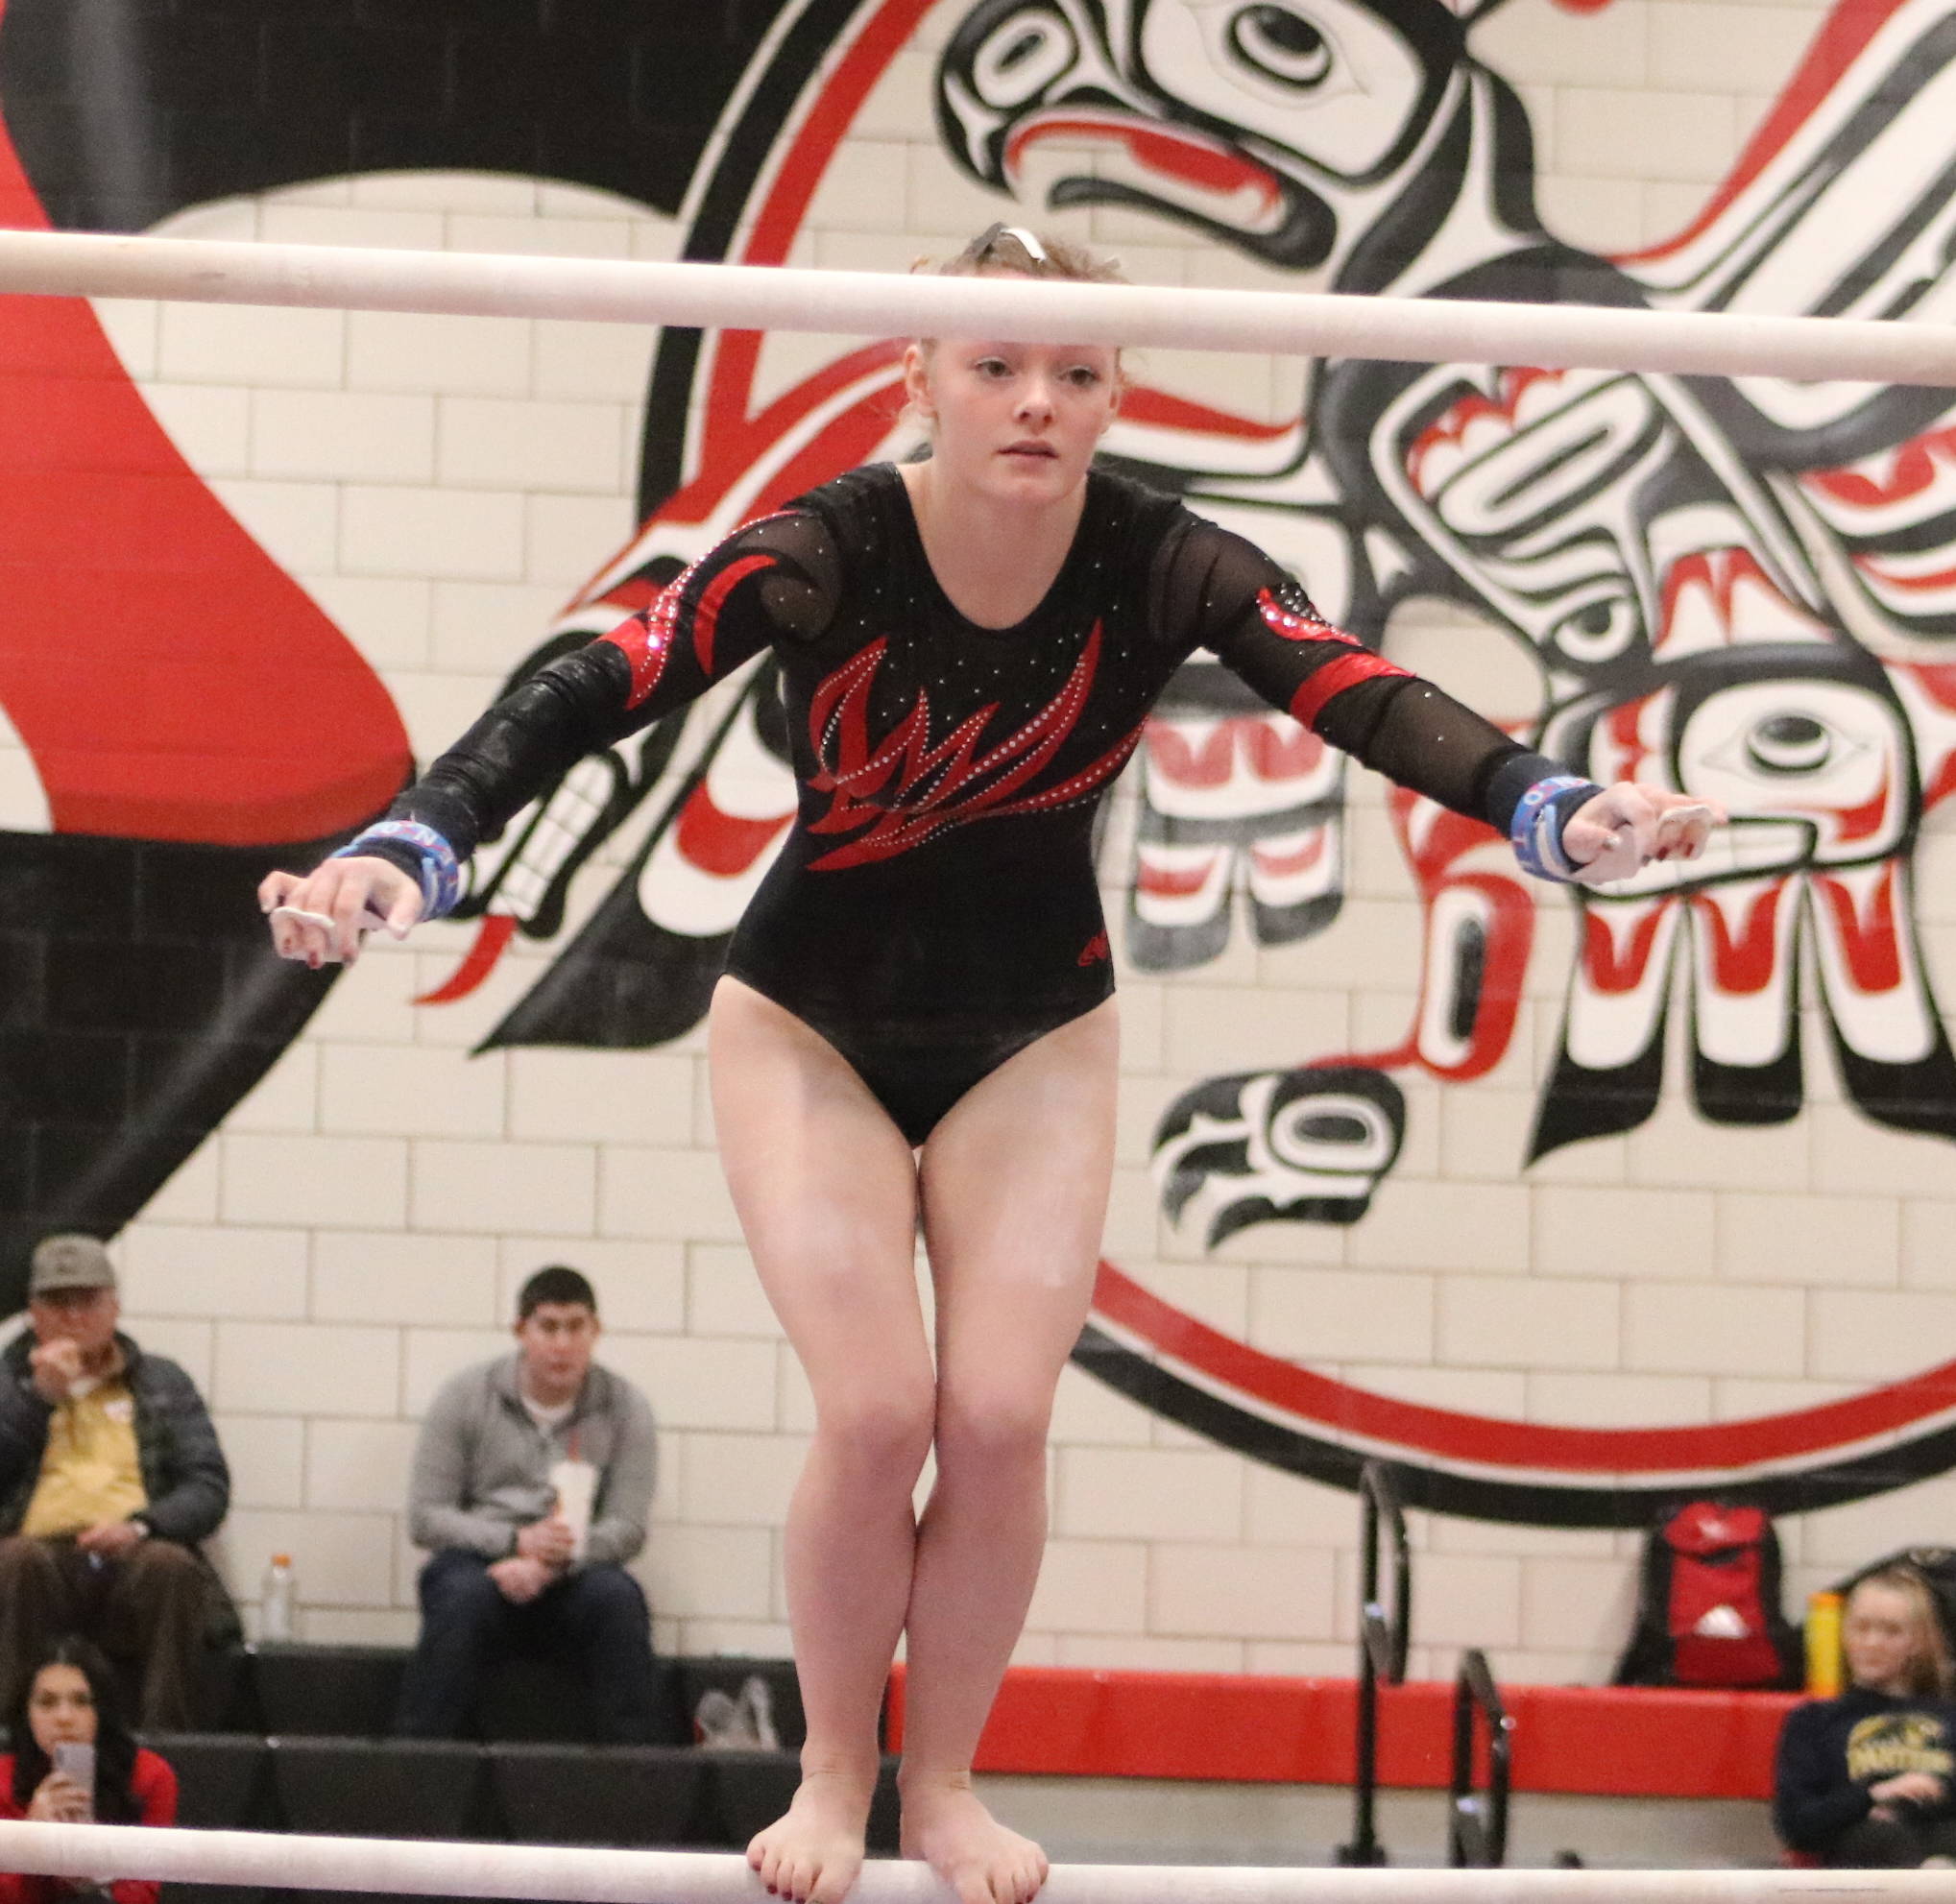 Mount Si’s Tylor Zwiefelhofer jumps to the high bar during her bars routine during the event finals at the 4A state gymnastics meet on Feb. 22 at Sammamish High School. Benjamin Olson/staff photo